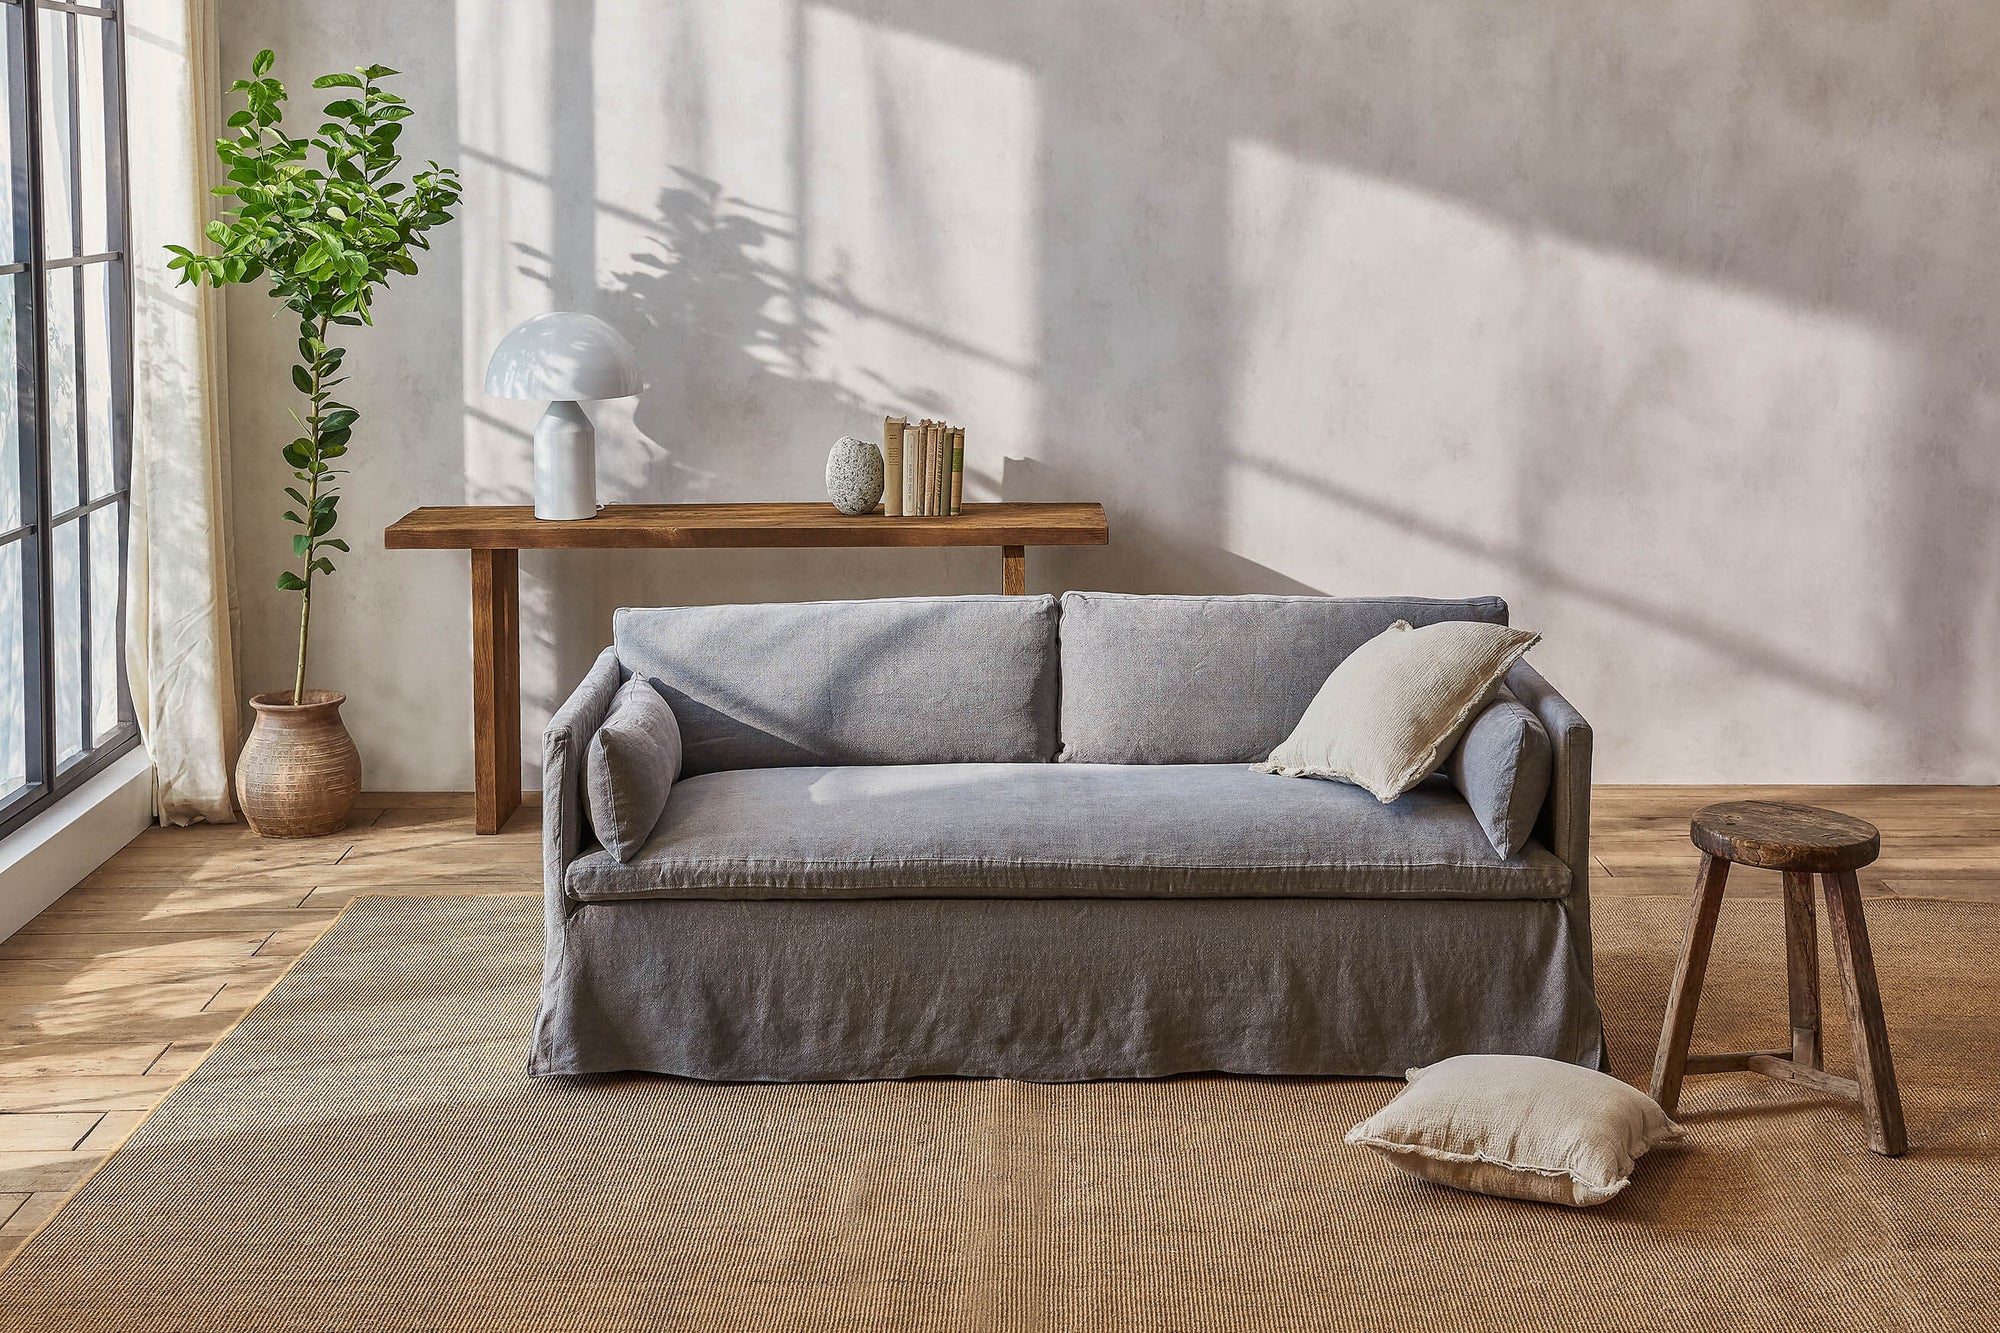 Gabriel 72" Sofa in Ink Cap, a medium cool grey Light Weight Linen, with a light taupe throw pillow, in front of a wooden console table and large potted plant